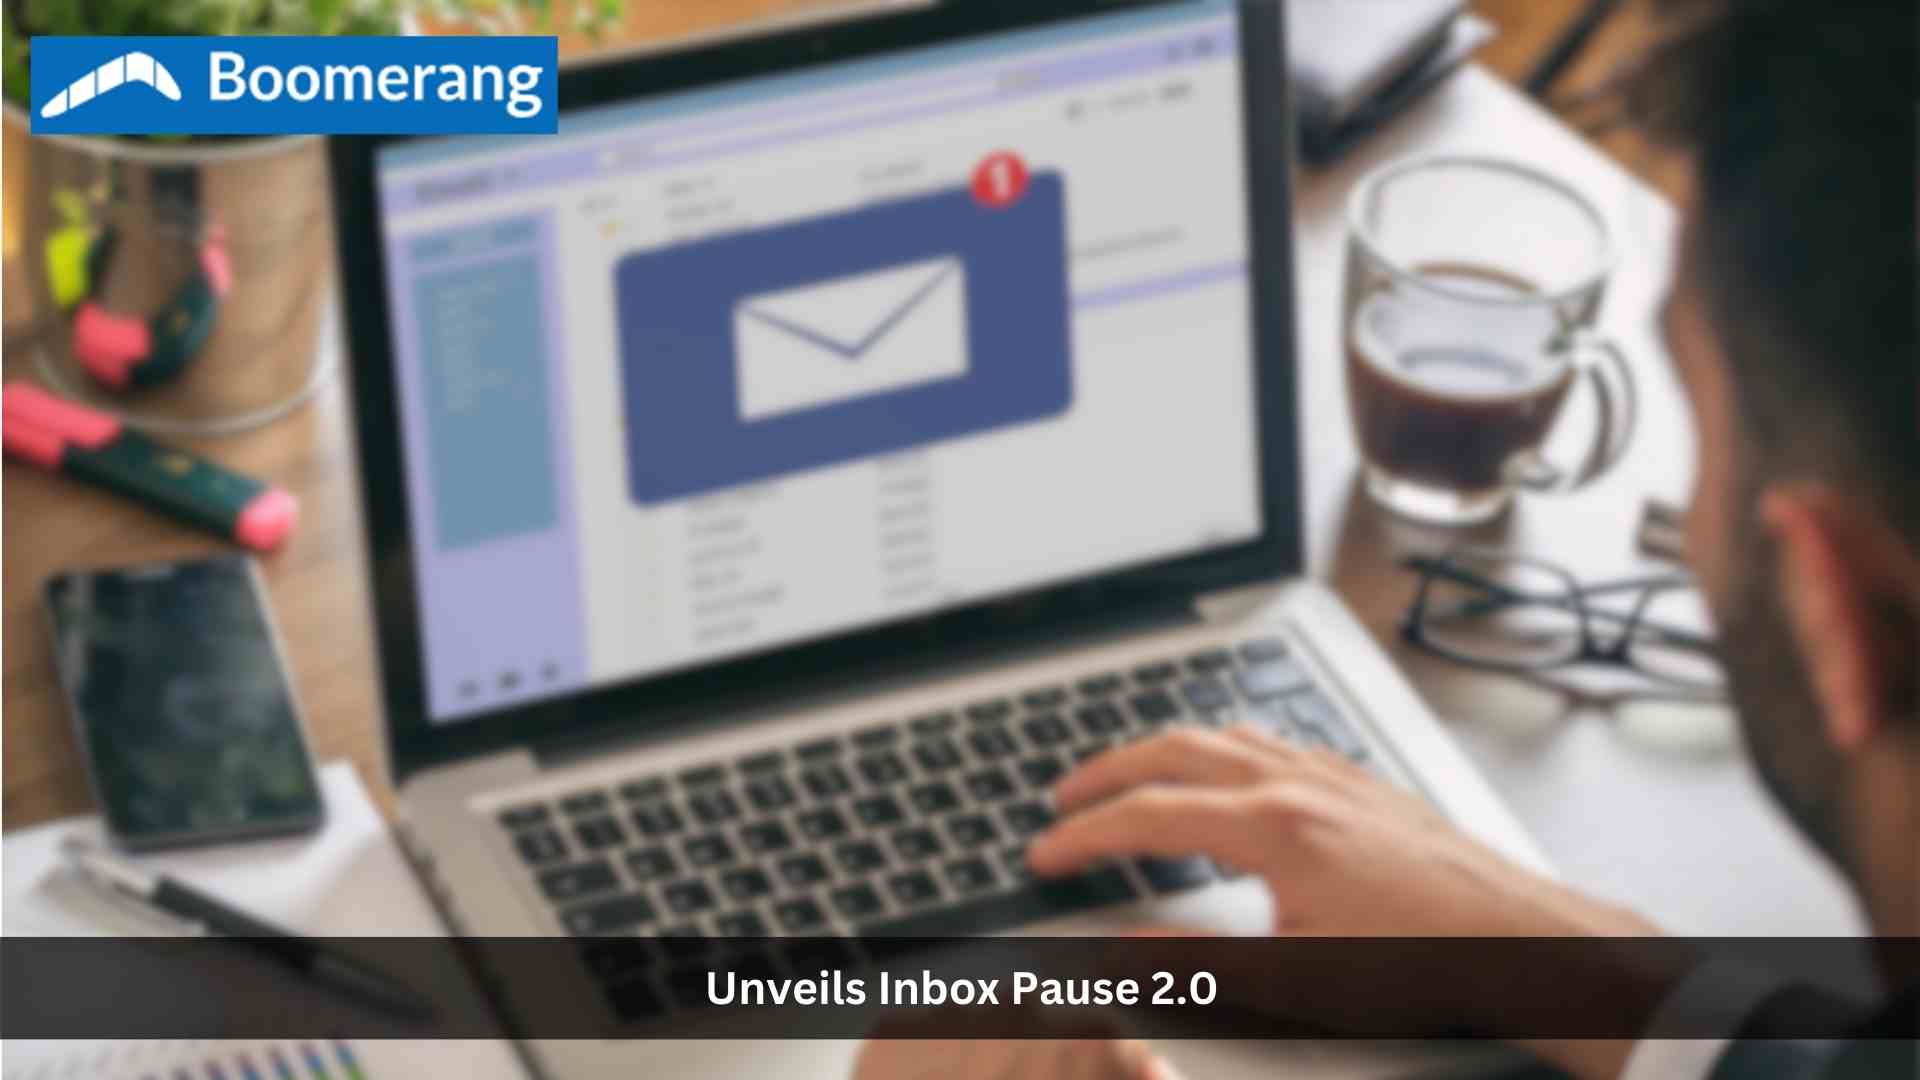 Boomerang Unveils Inbox Pause 2.0, Redefining Email Management Amid Evolving Workplace Cultures